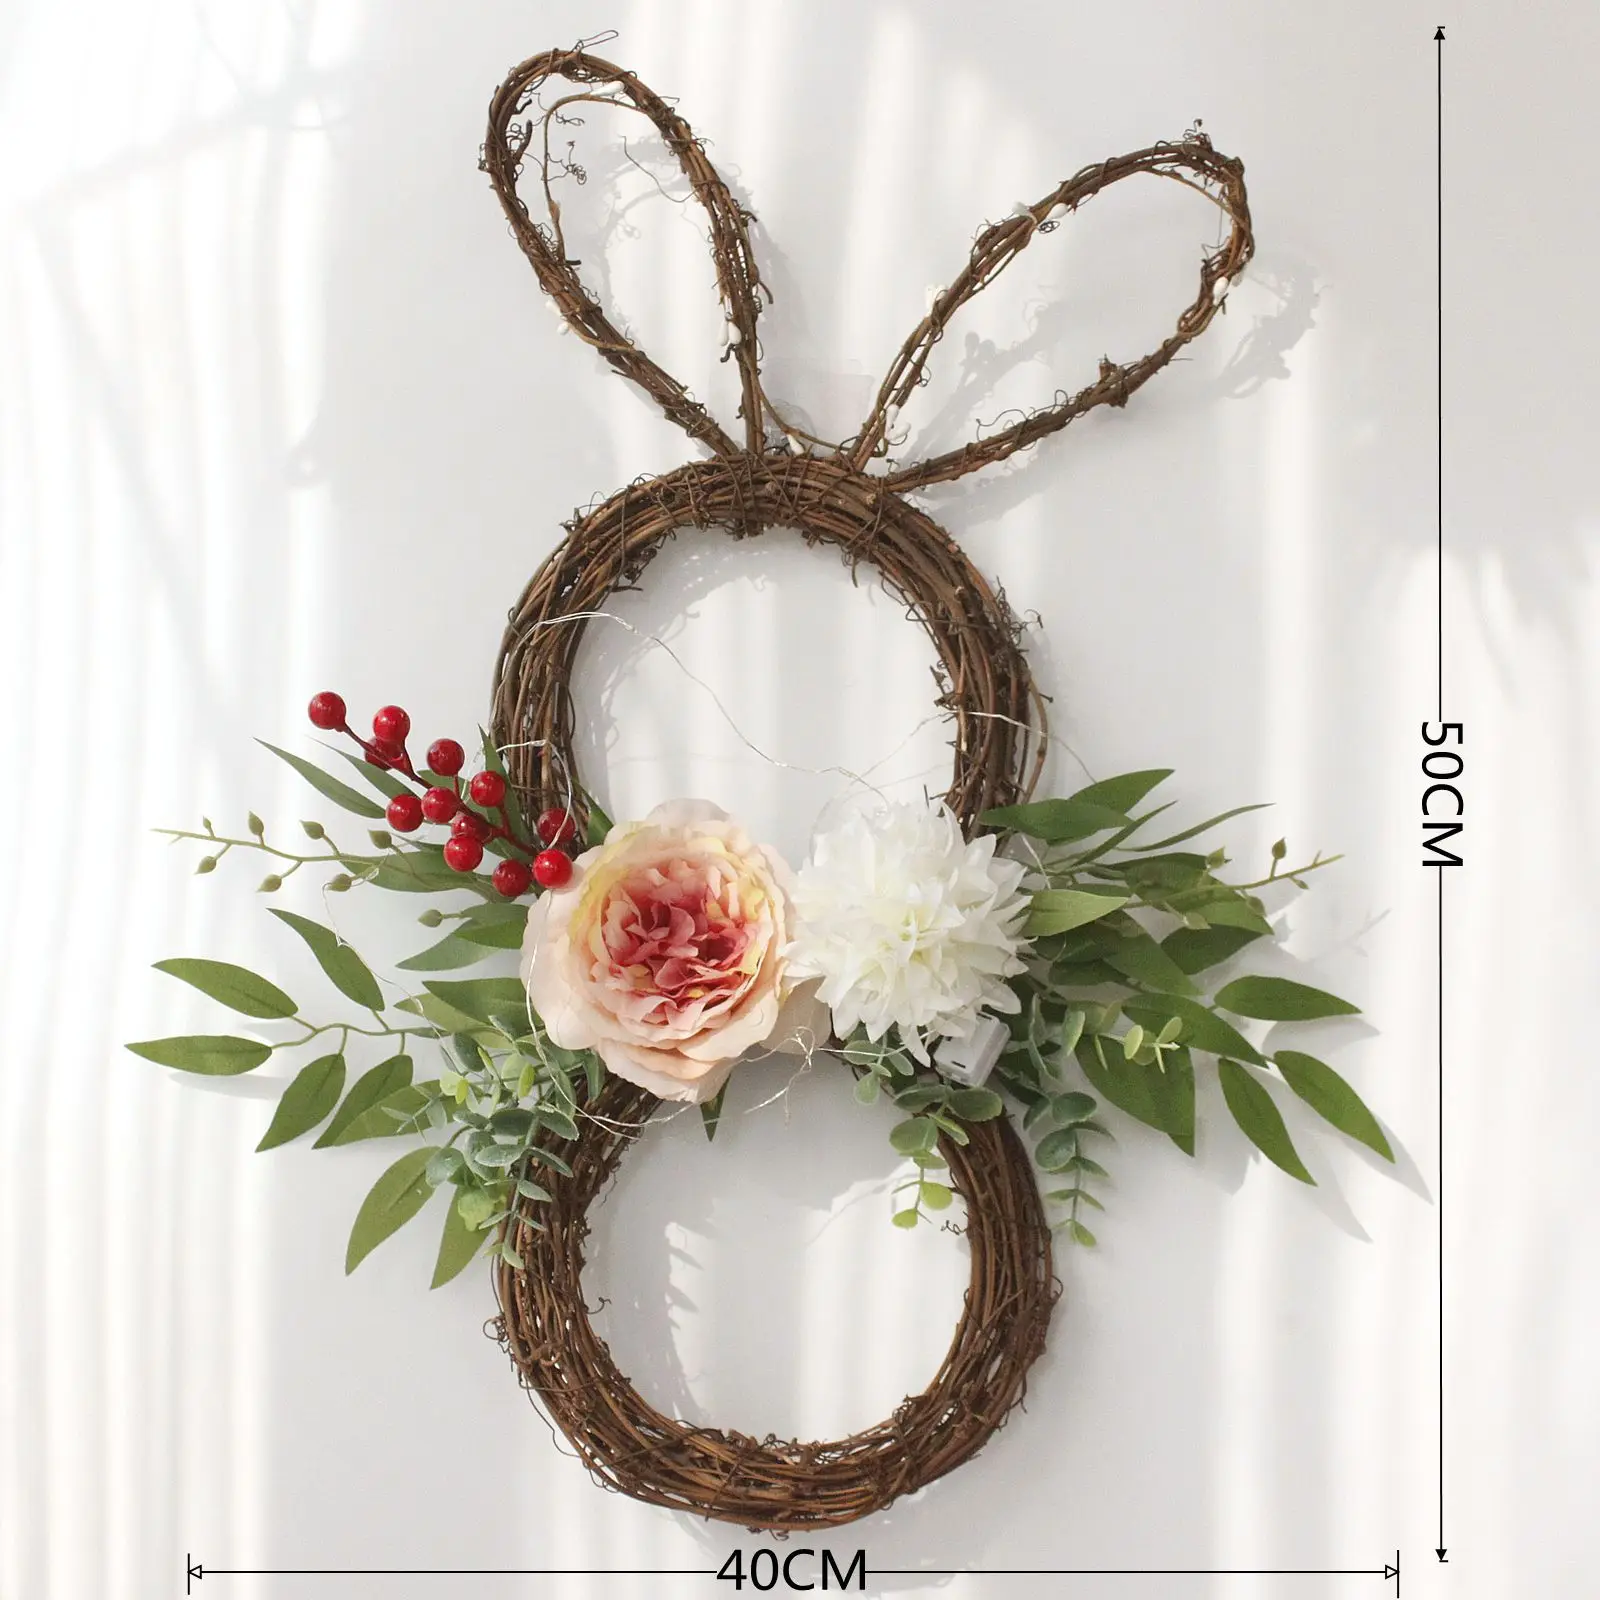 

Easter Artificial Rabbit Shape Wreath Decorations Festival Party Home Door Wall Hanging Bunny Garland Scene Layout Ornaments